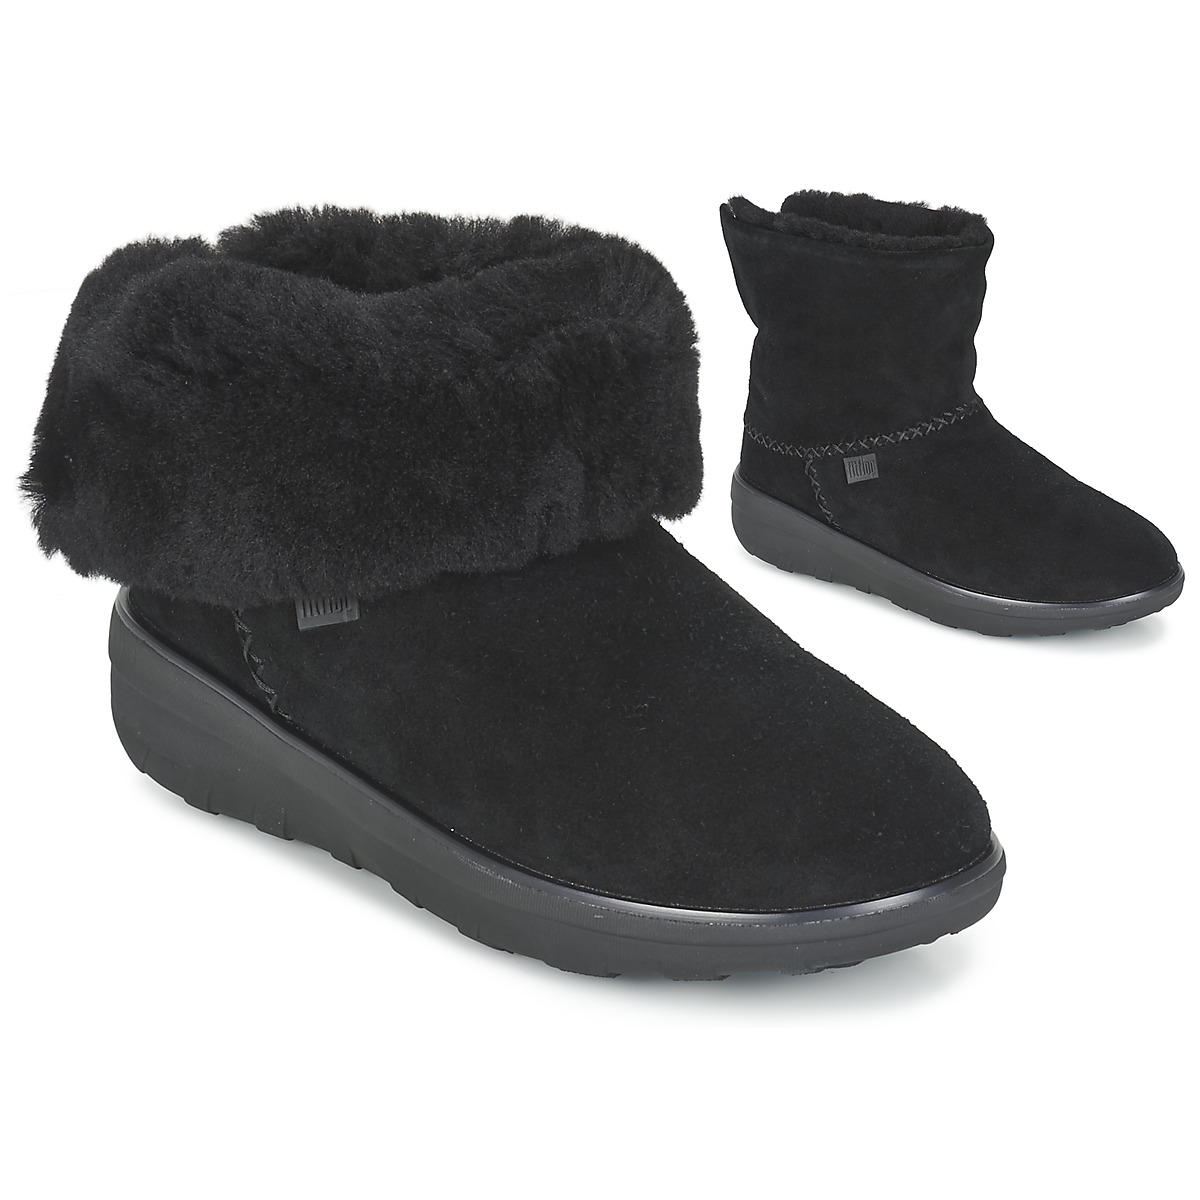 FitFlop Mukluk Shorty 2 Boots Black